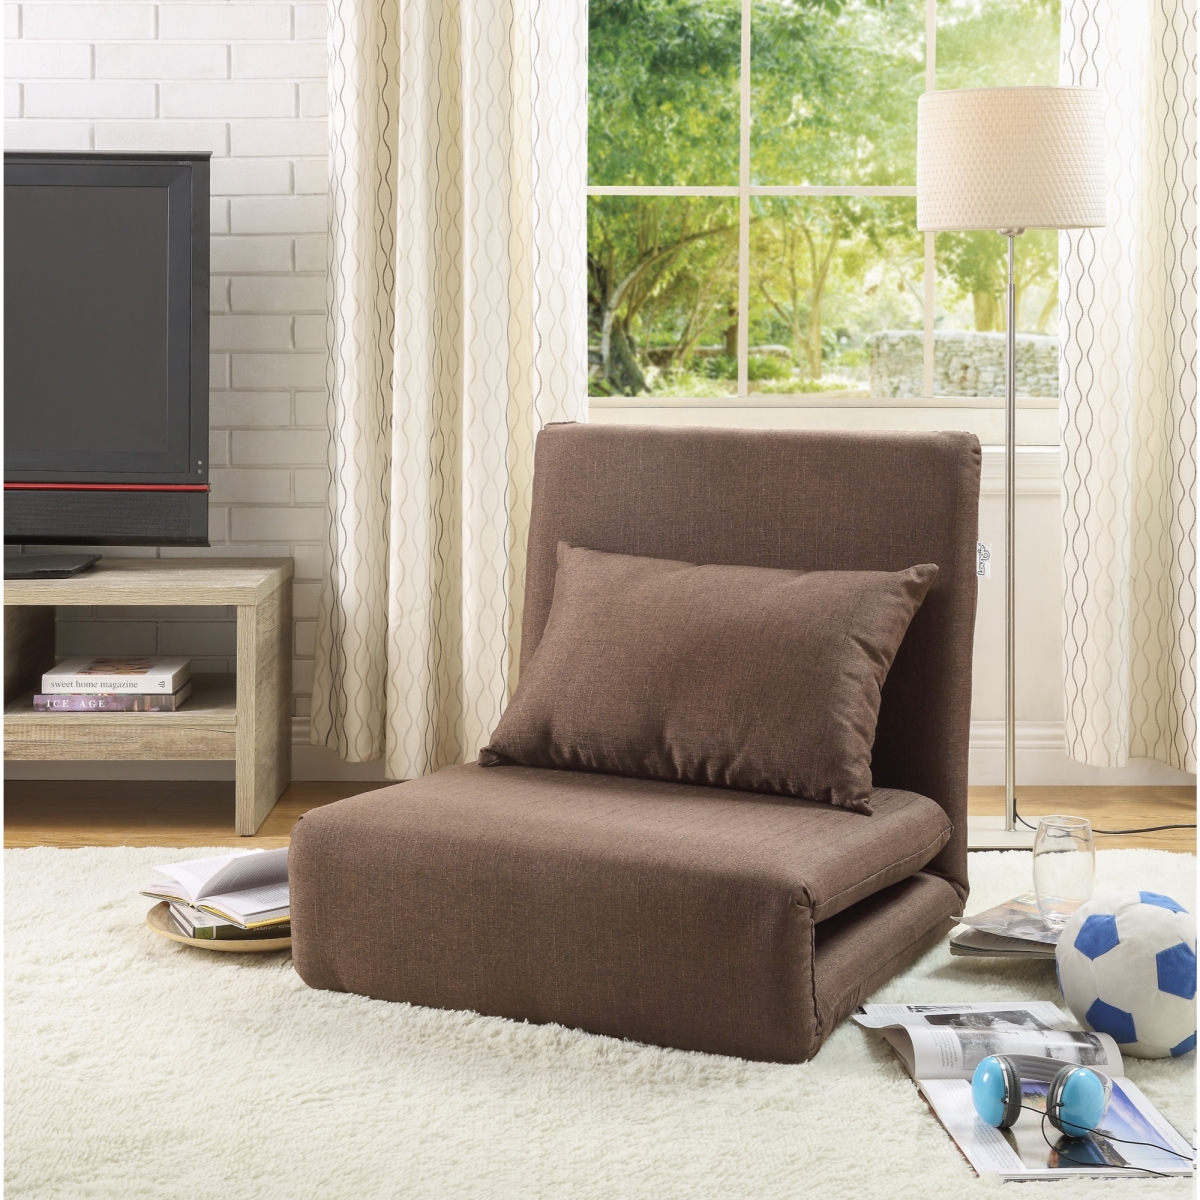 Picture of  Relaxie Linen 5-Position Adjustable Convertible Flip Chair Sleeper Dorm Bed Couch Lounger Sofa - Brown